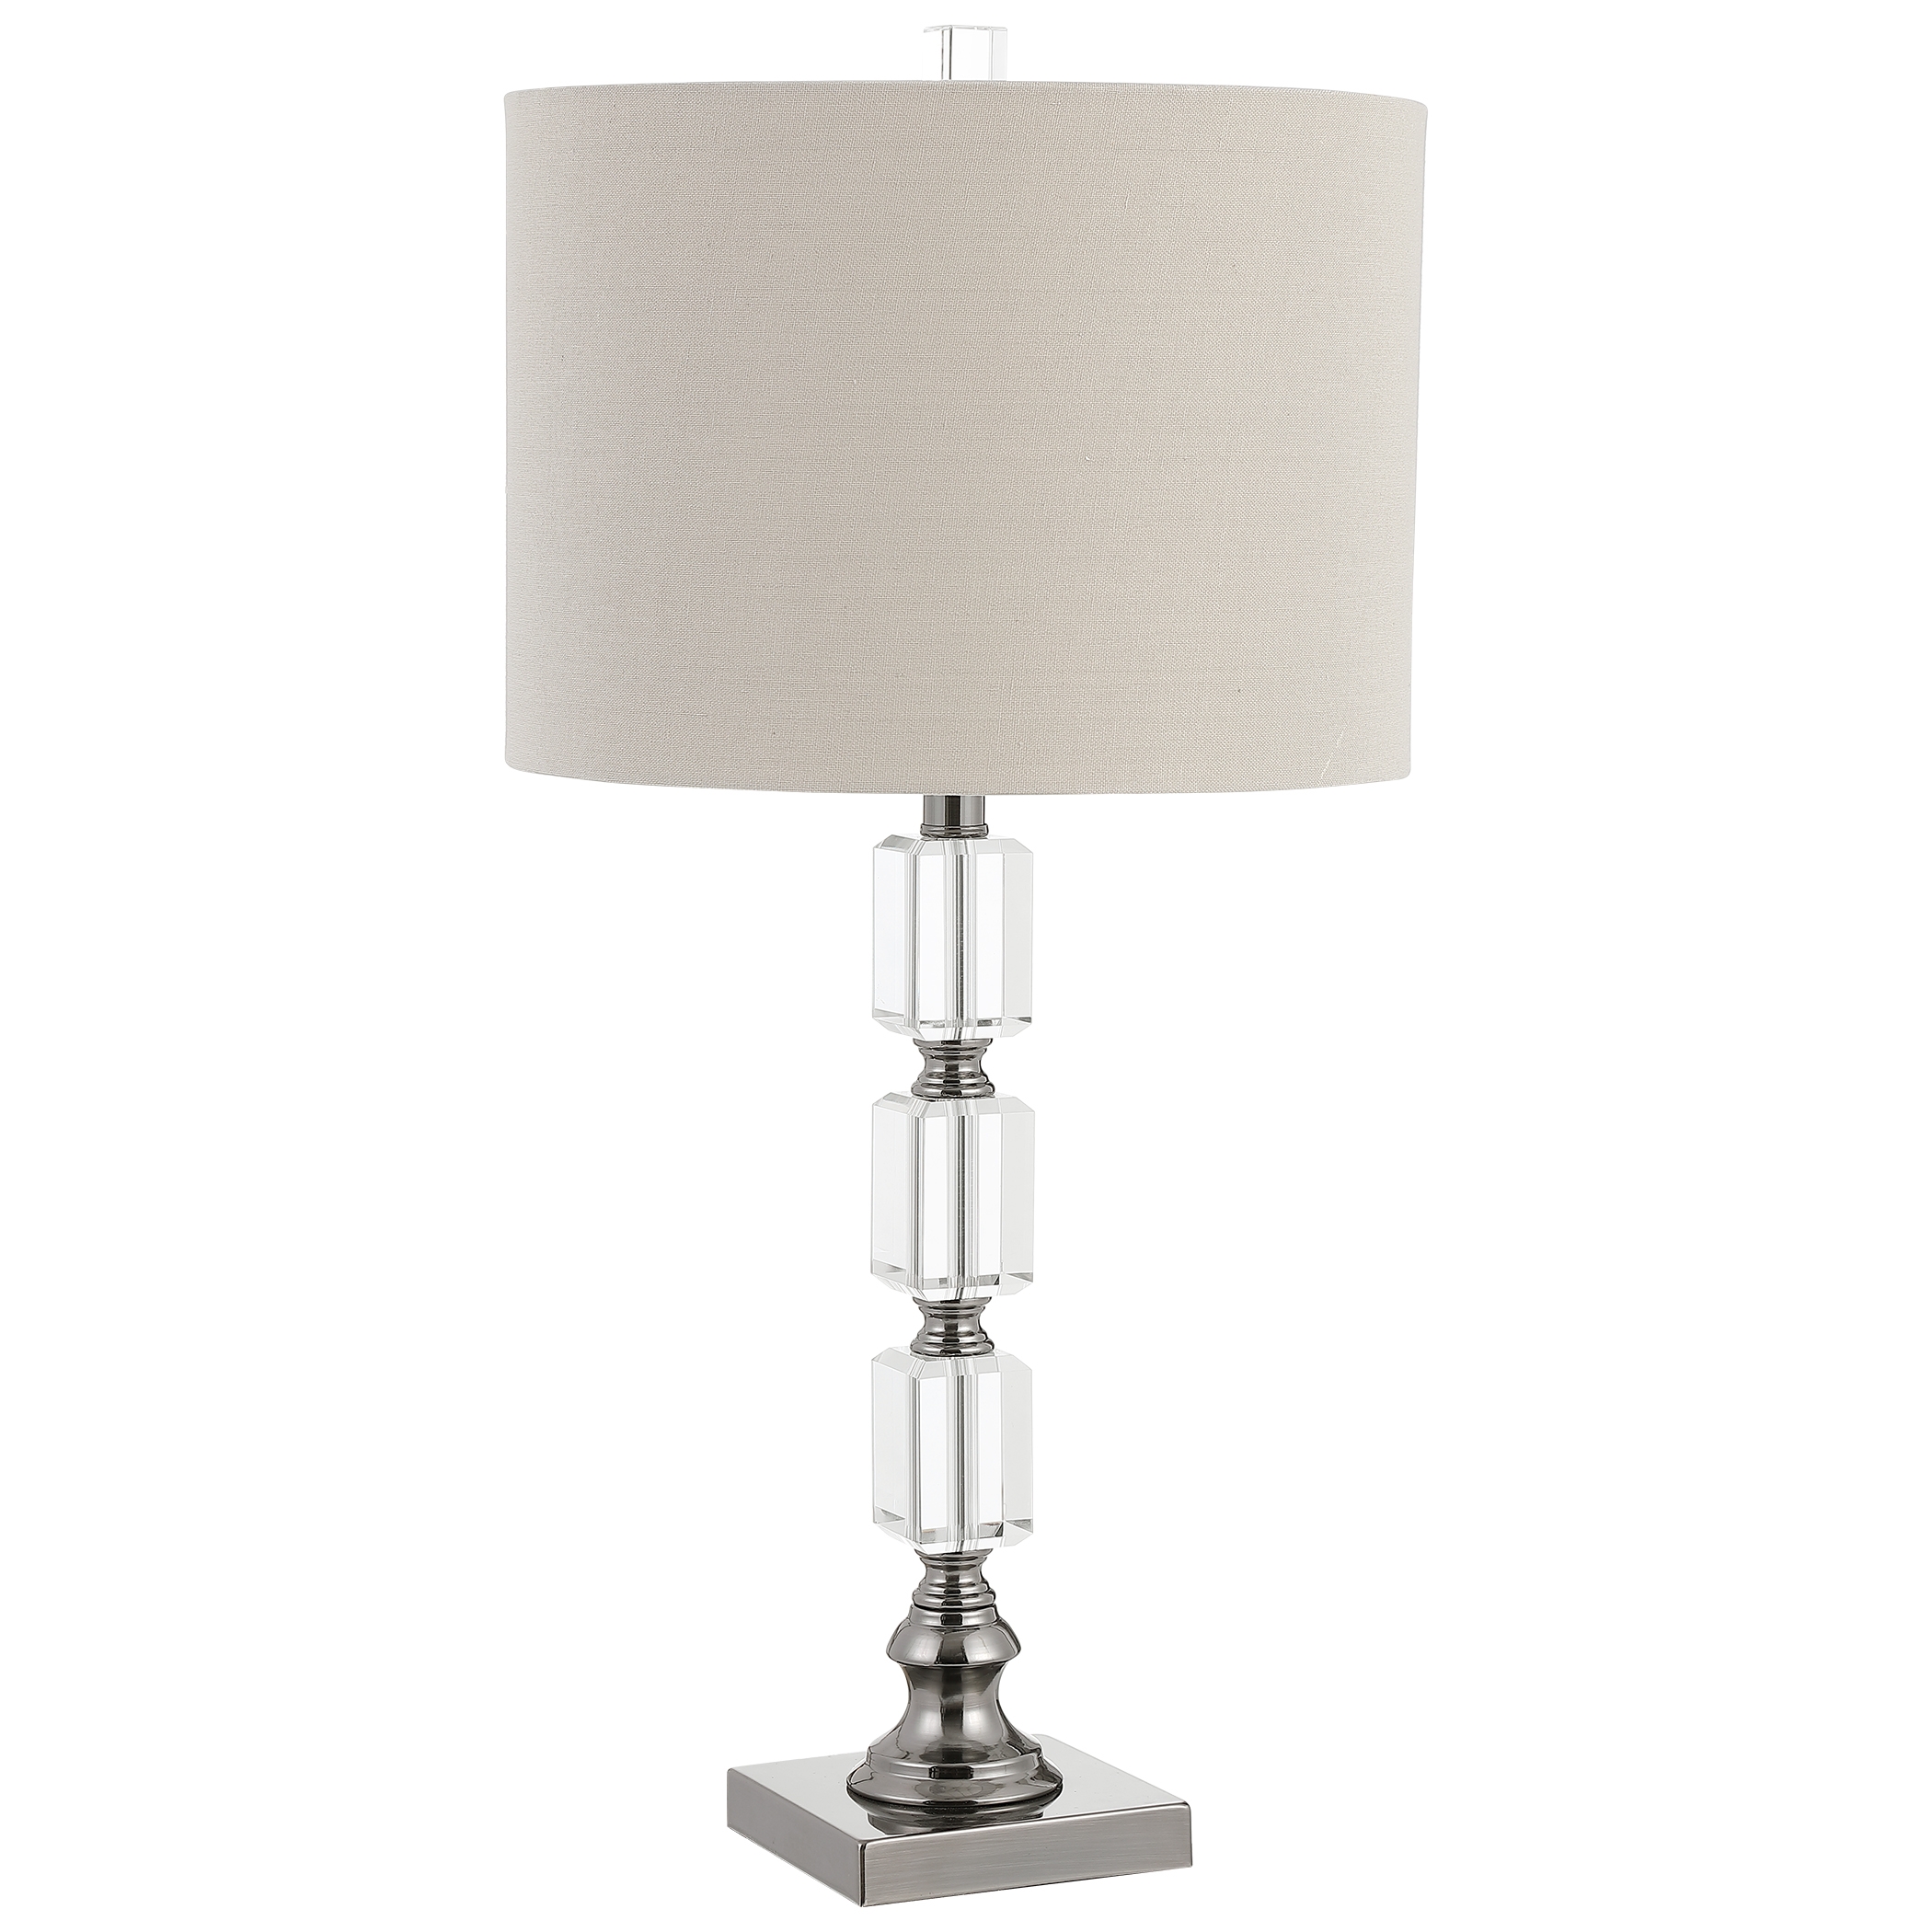 TABLE LAMP - Image 2